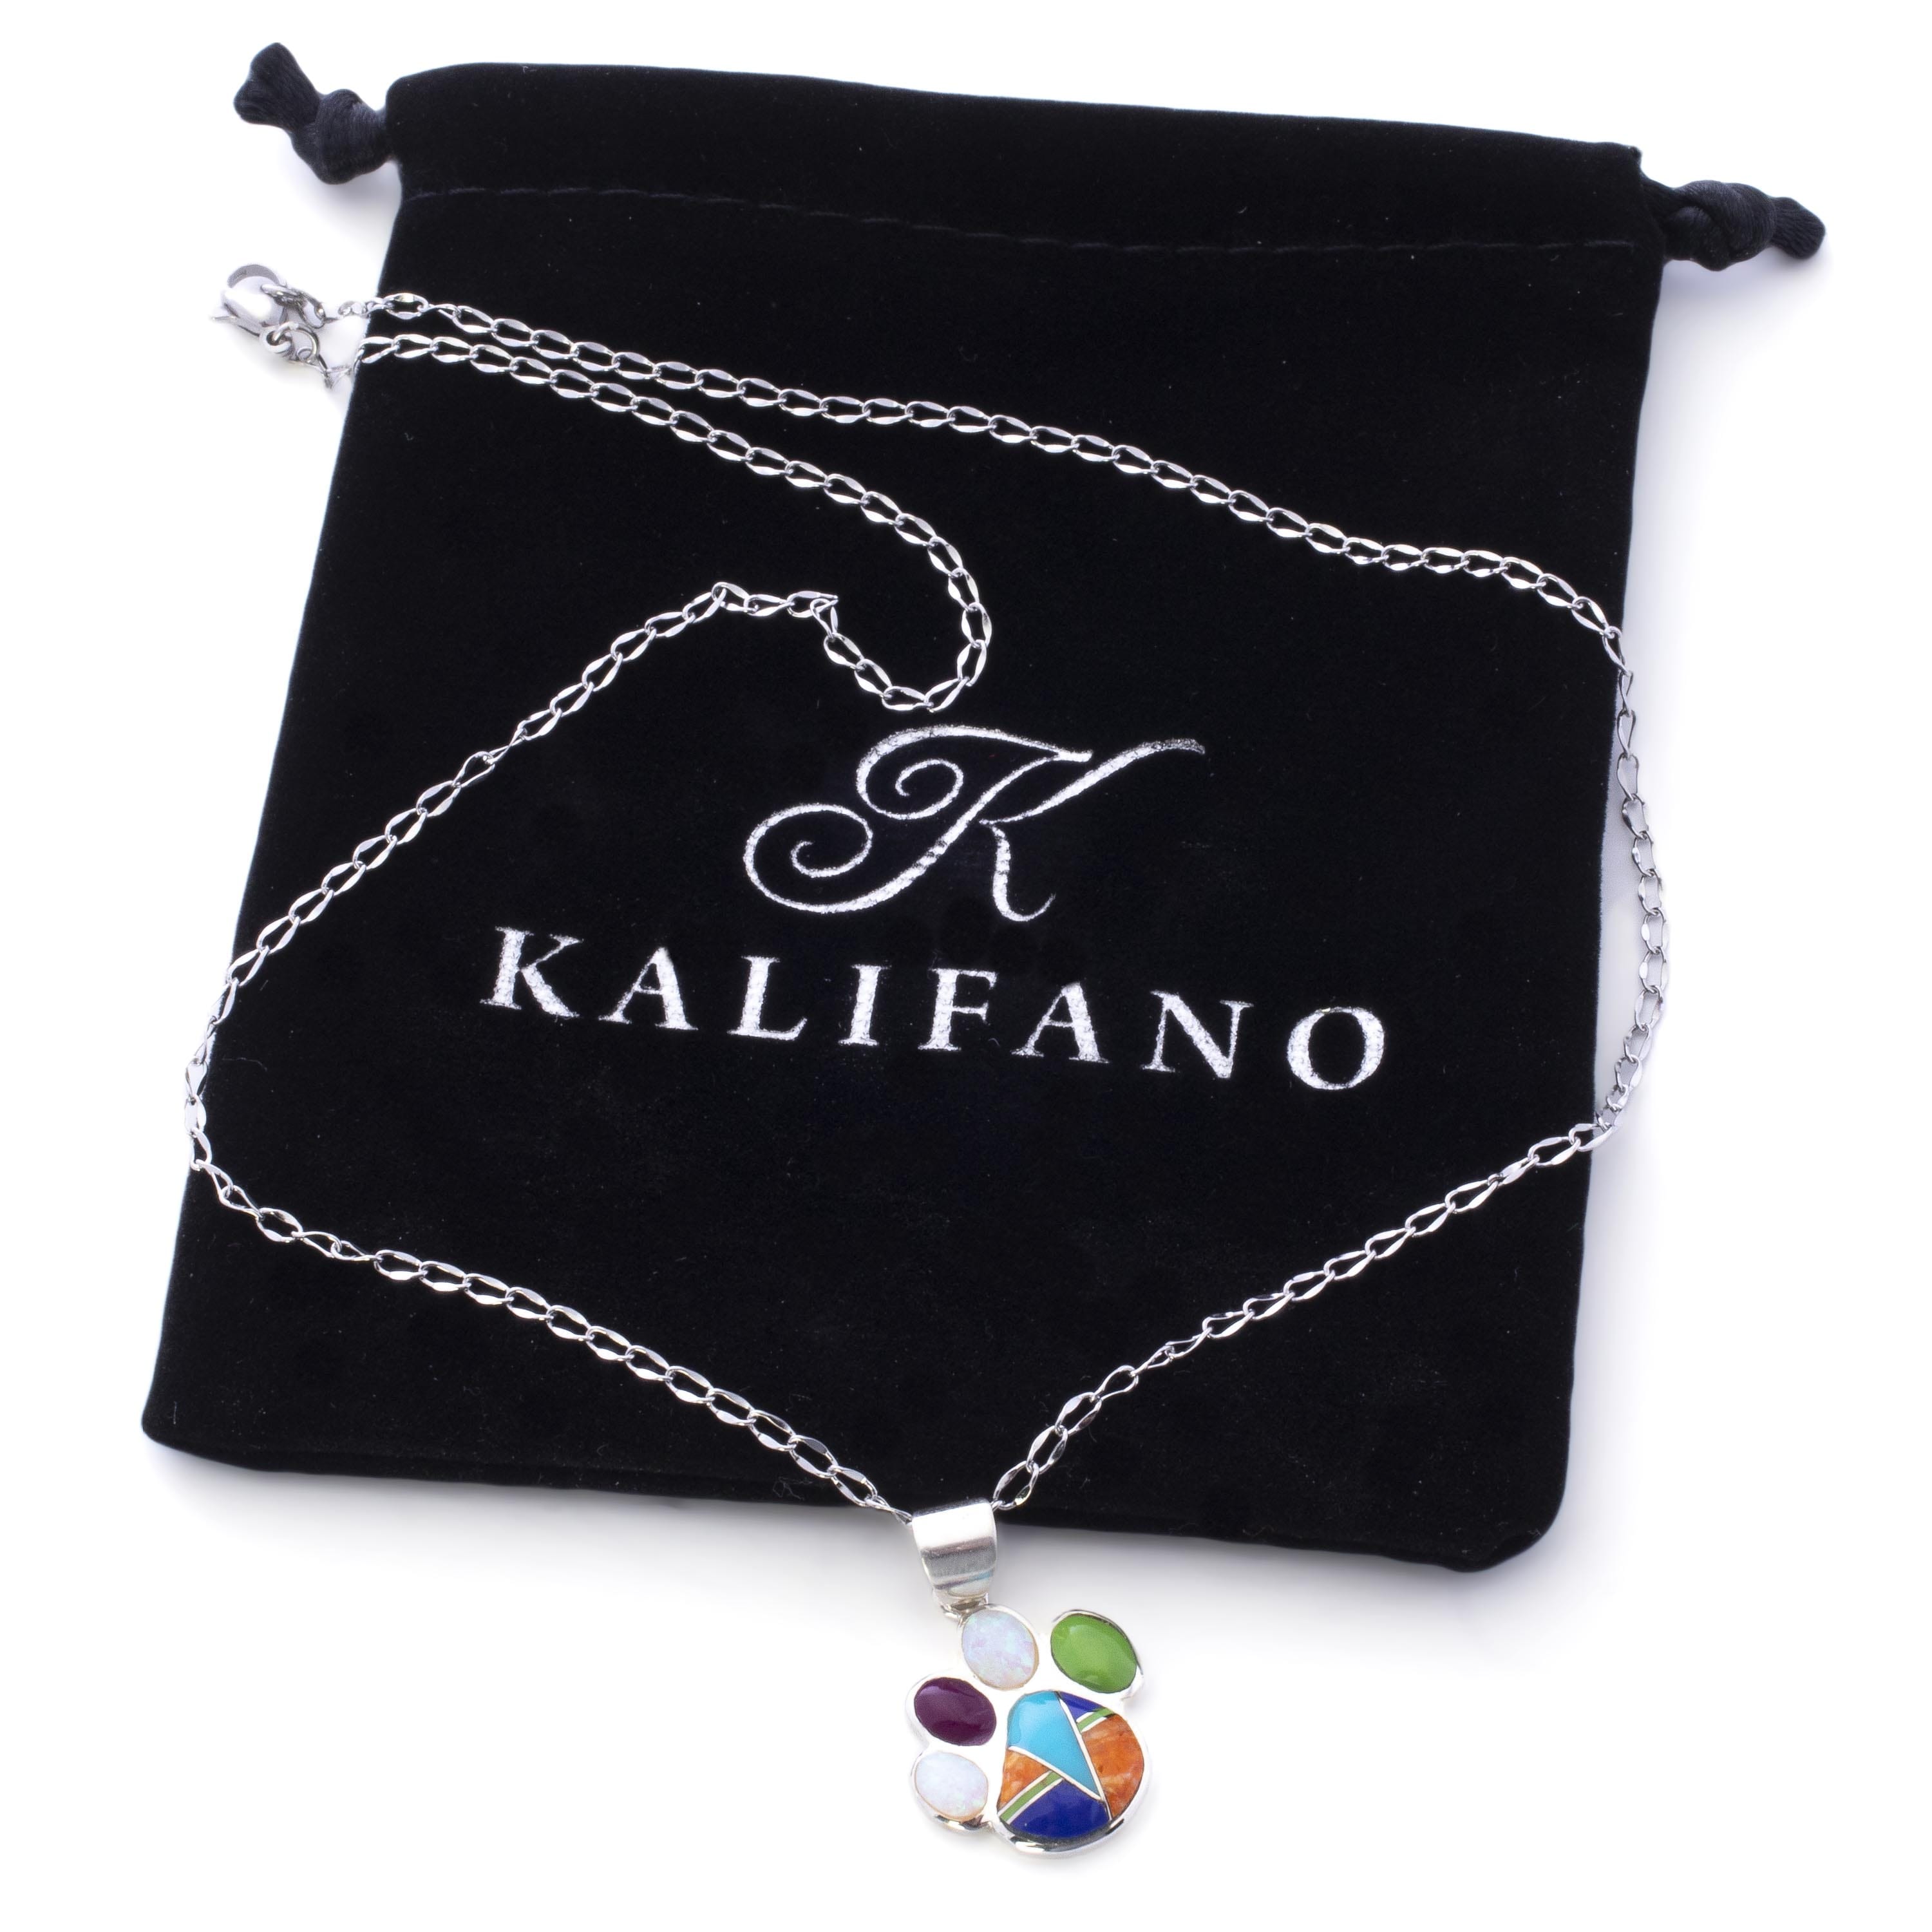 Kalifano Southwest Silver Jewelry Multi Gemstone Dog Paw 925 Sterling Silver Pendant USA Handmade with Opal Accent NMN.2364.MT